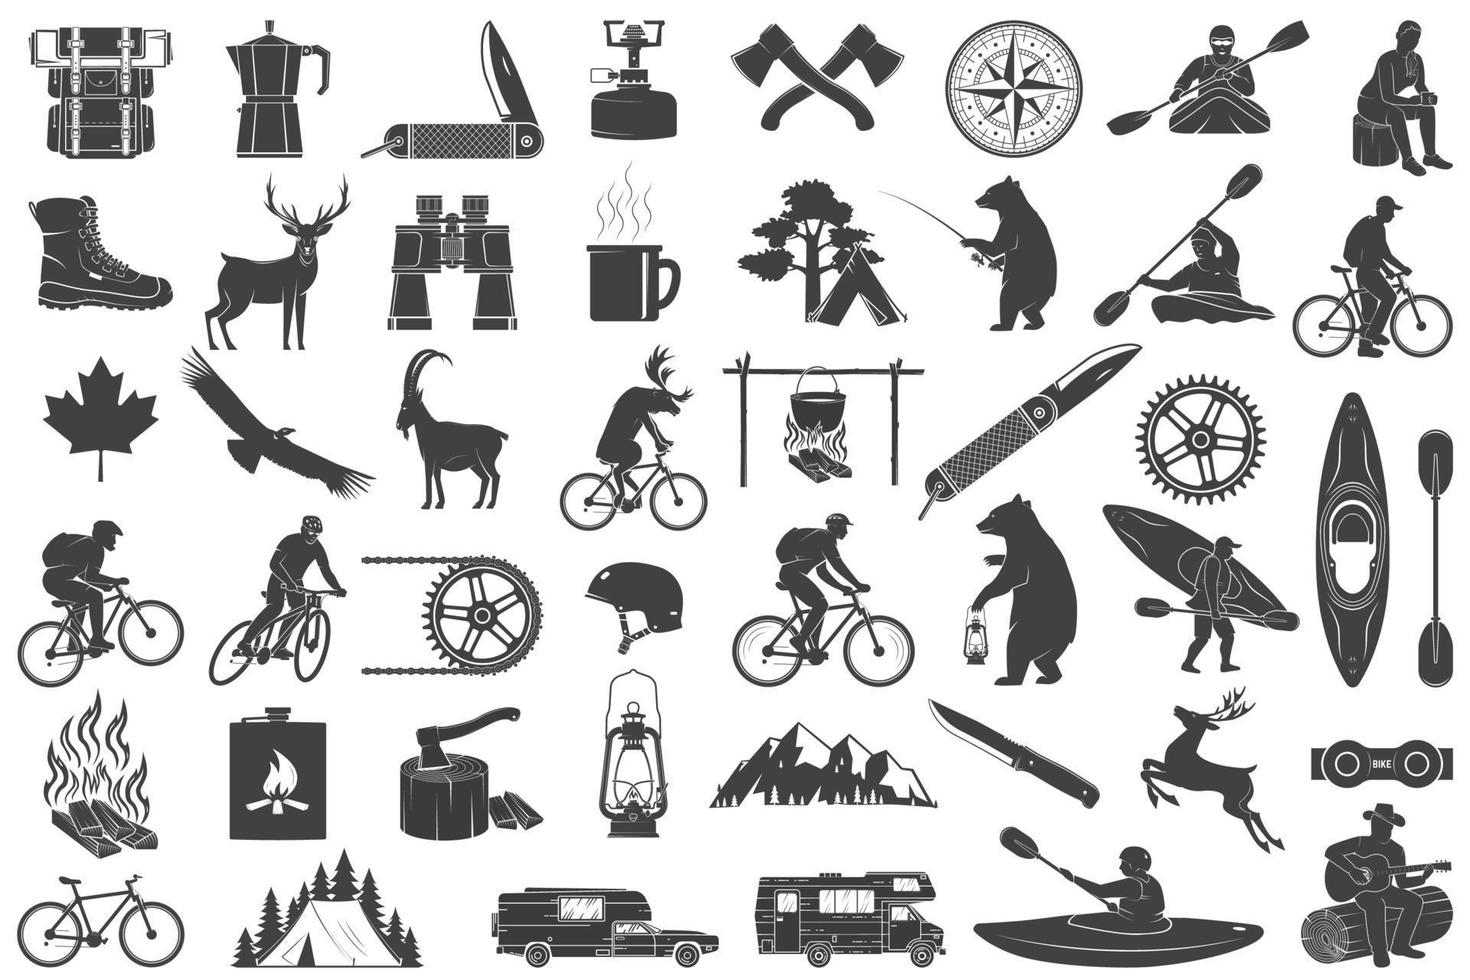 Set of Hiking and Camping icons isolated on the white. Vector. Set include fishing bear, mountains, knife, tent, cup, coffee, goat, gas stove, water sports equipment, forest silhouette vector